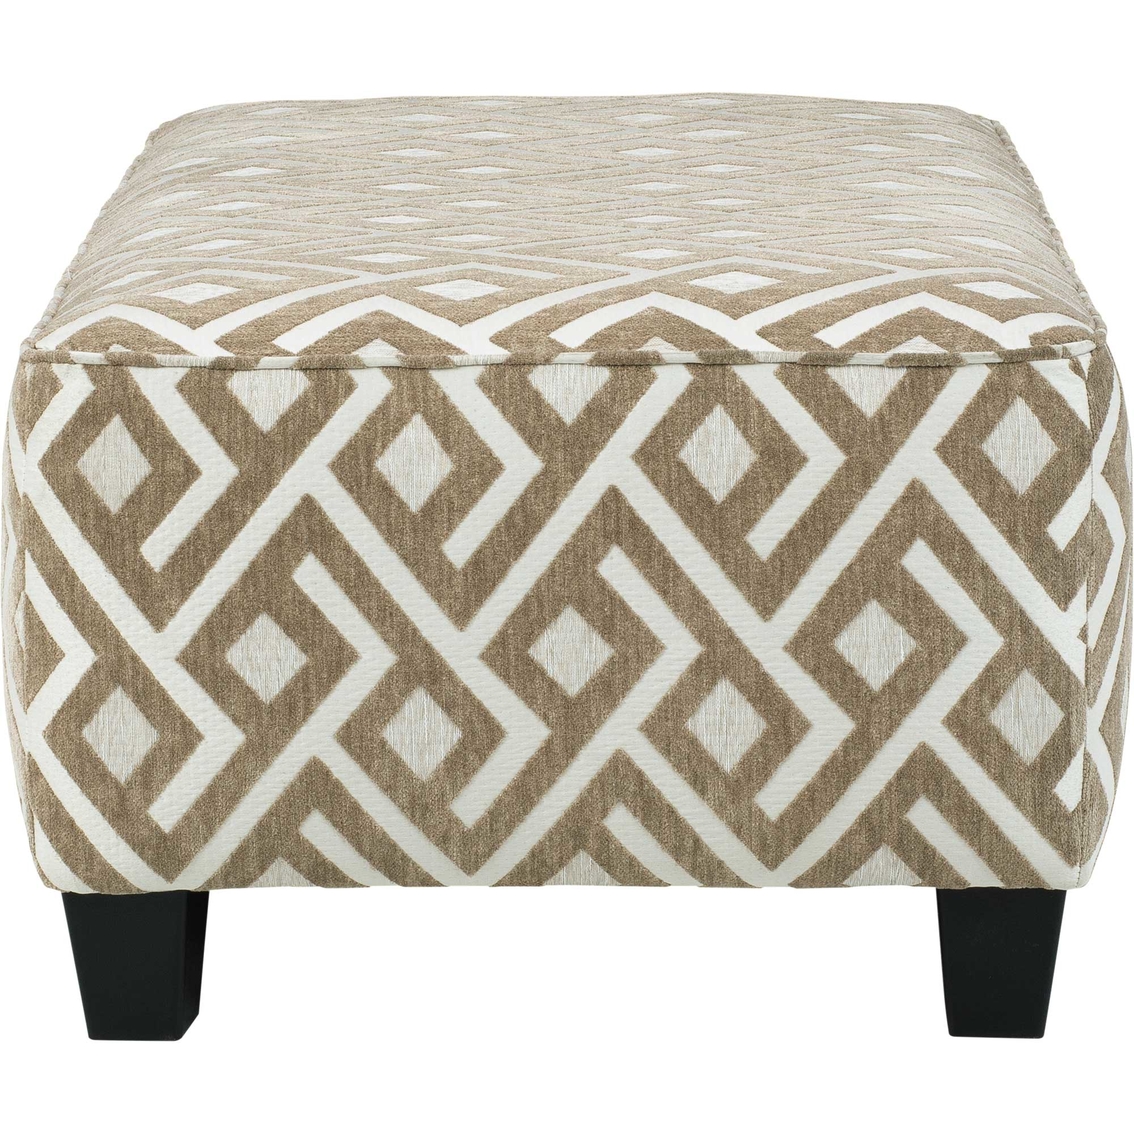 Signature Design by Ashley Dovemont Oversized Accent Ottoman - Image 2 of 4